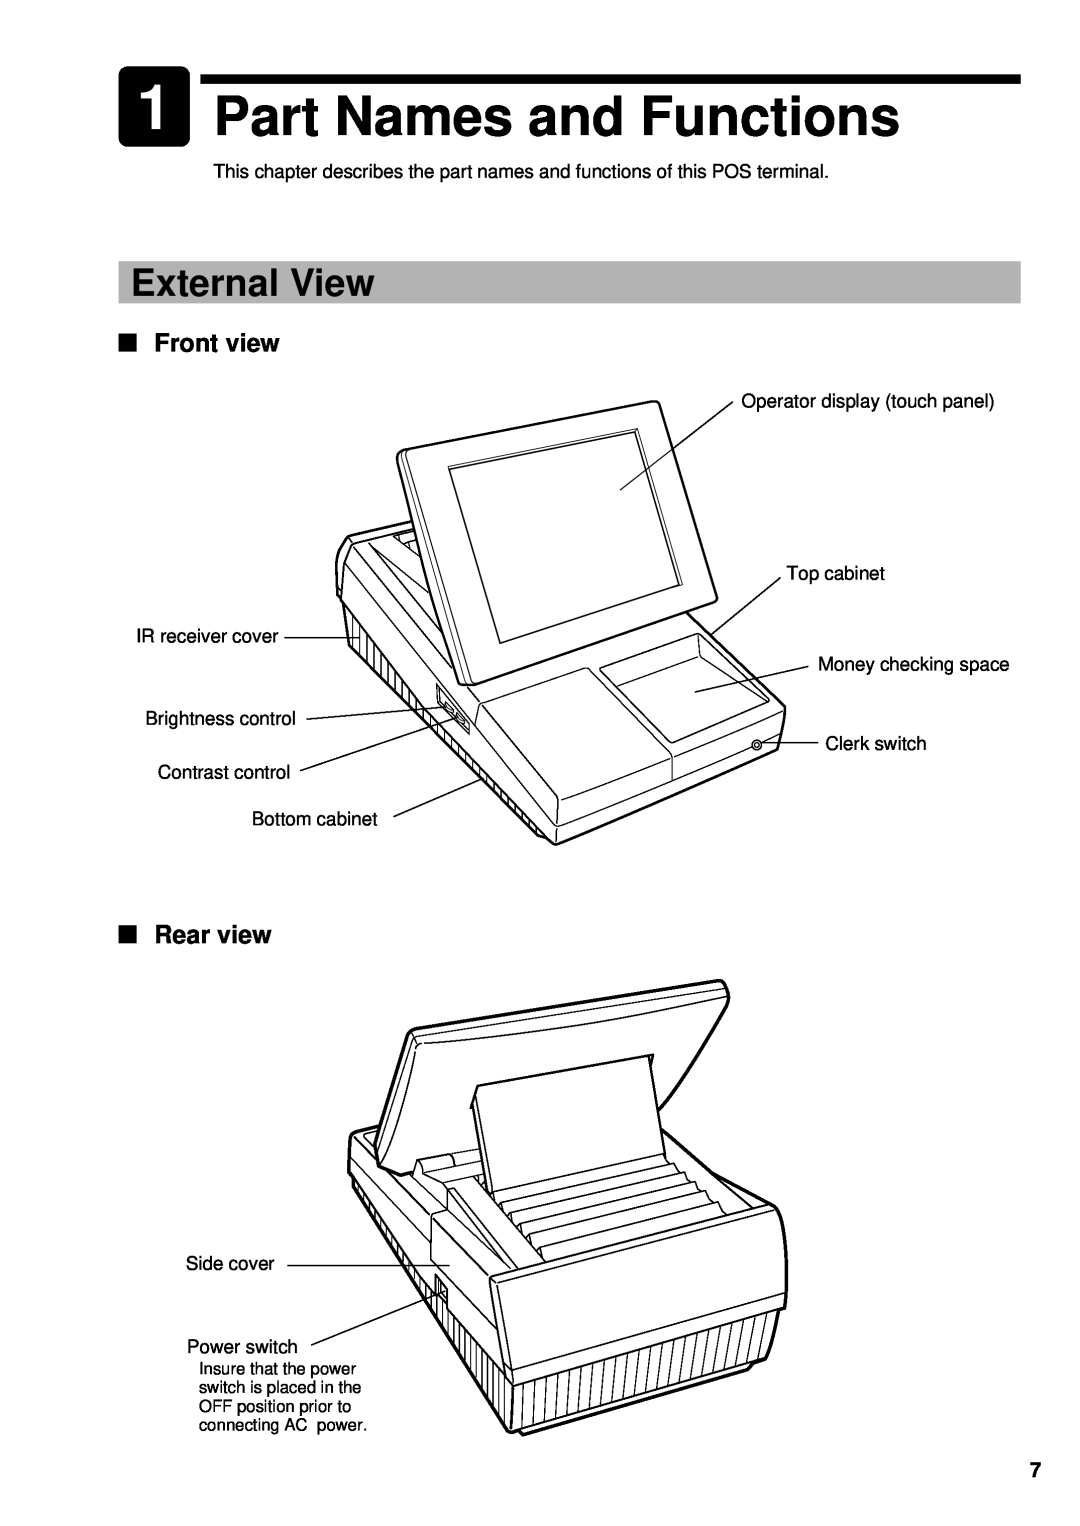 Sharp UP-3300 instruction manual 1Part Names and Functions, External View, Front view, Rear view 